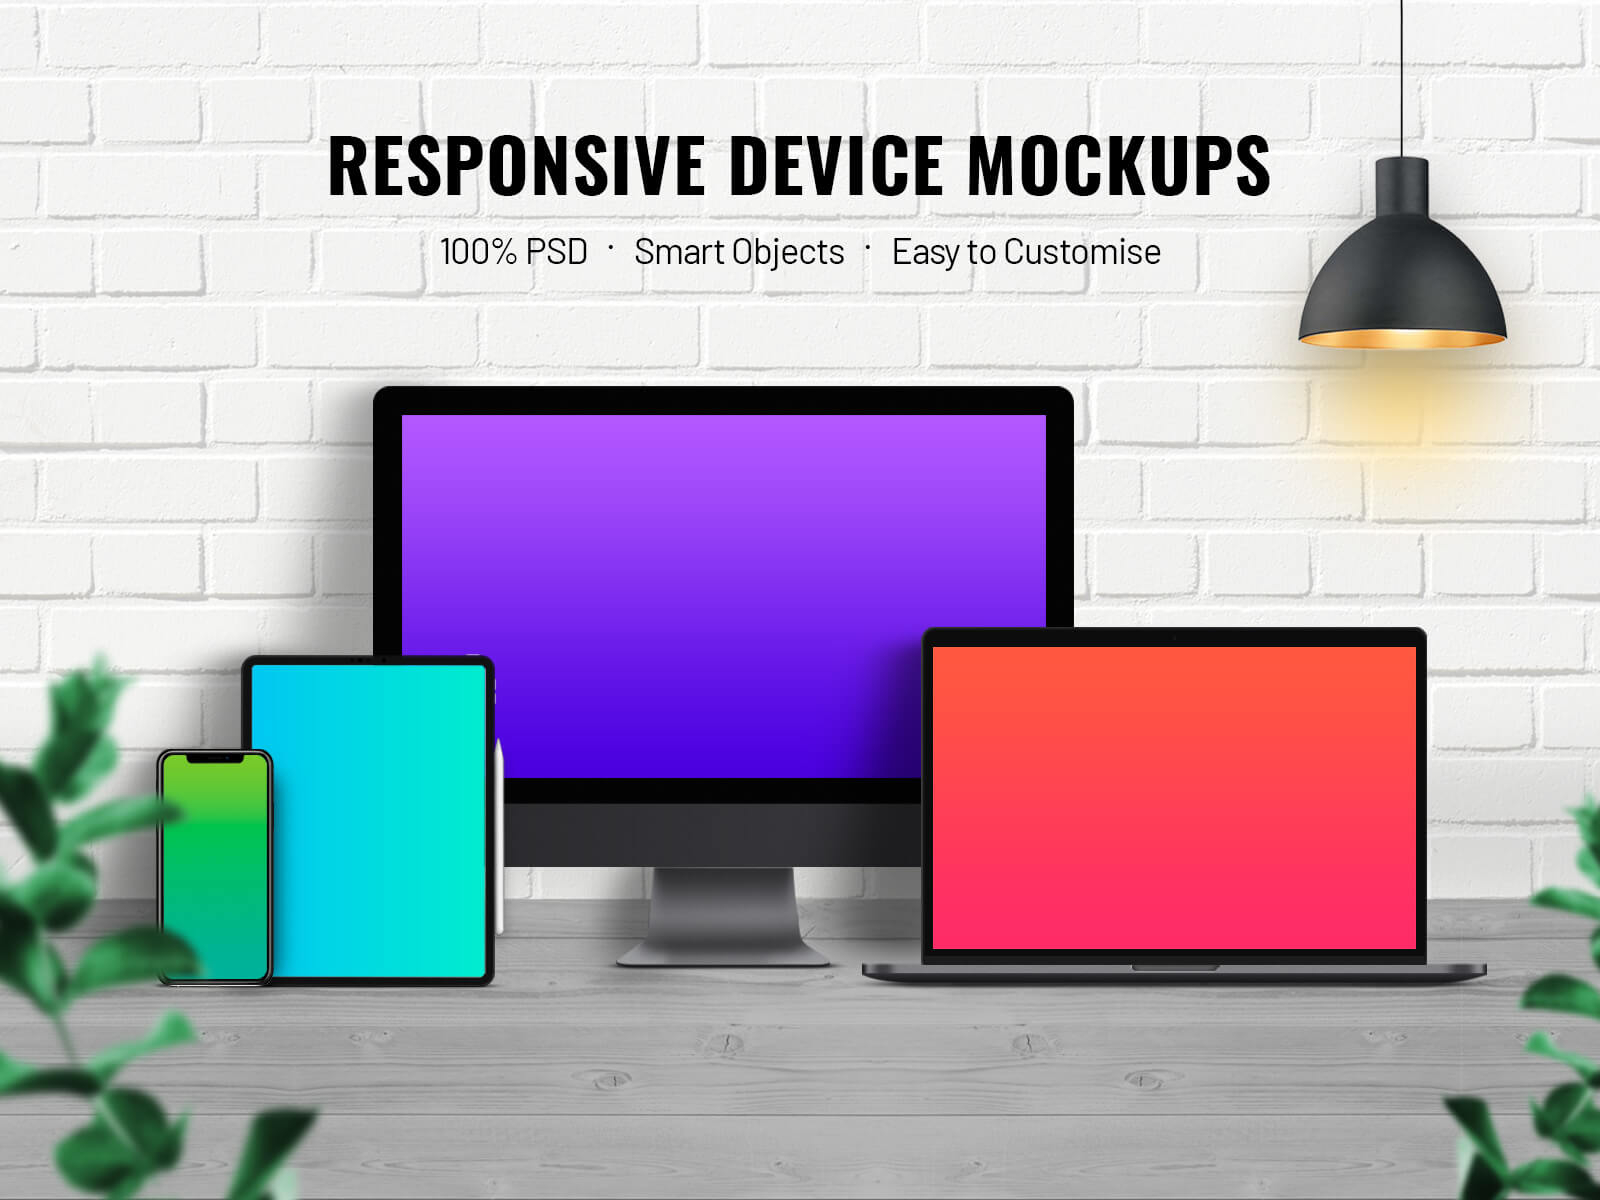 Responsive Screen Mockup by VictorThemes on Dribbble